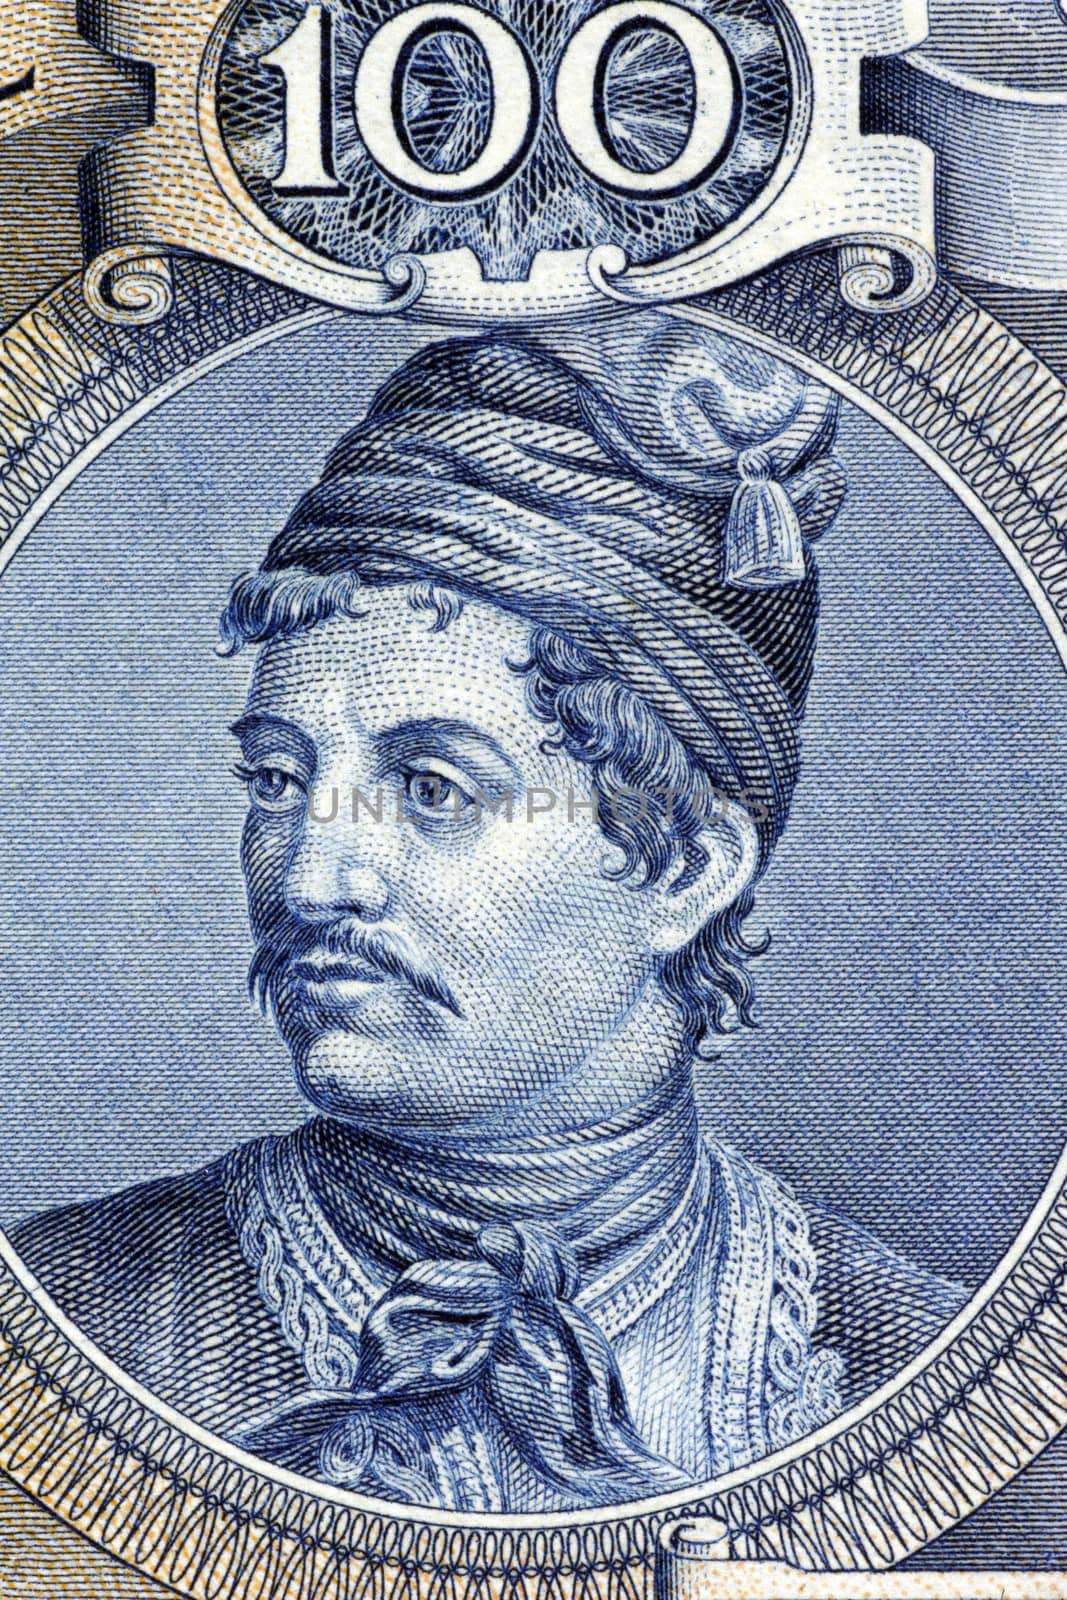 Constantine Kanaris (1793-1877) on 100 Drachmai 1944 Banknote from Greece. Greek Prime Minister, admiral and politician who in his youth was a freedom fighter in the Greek War of Independence.